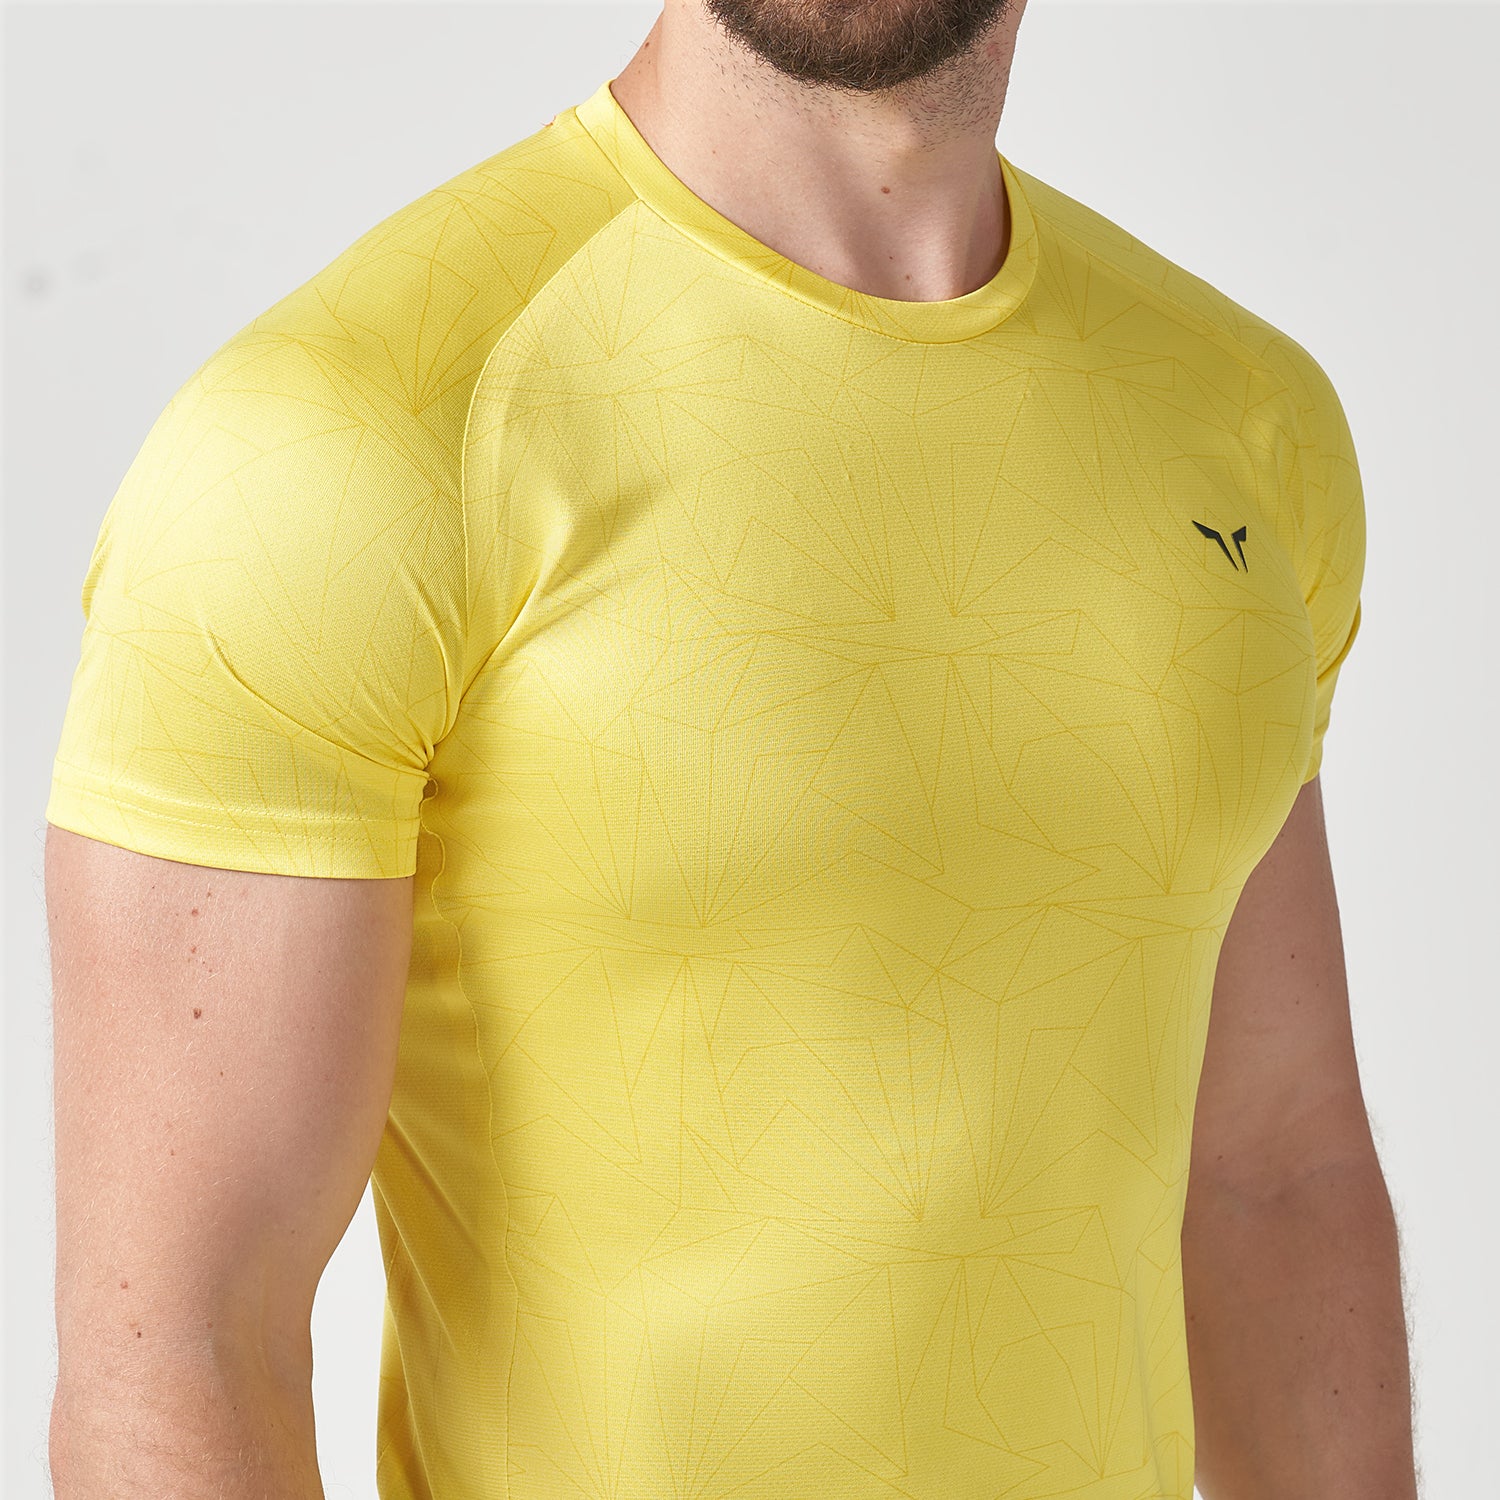 squatwolf-gym-wear-lab360-power-tee-yellow-workout-shirts-for-men